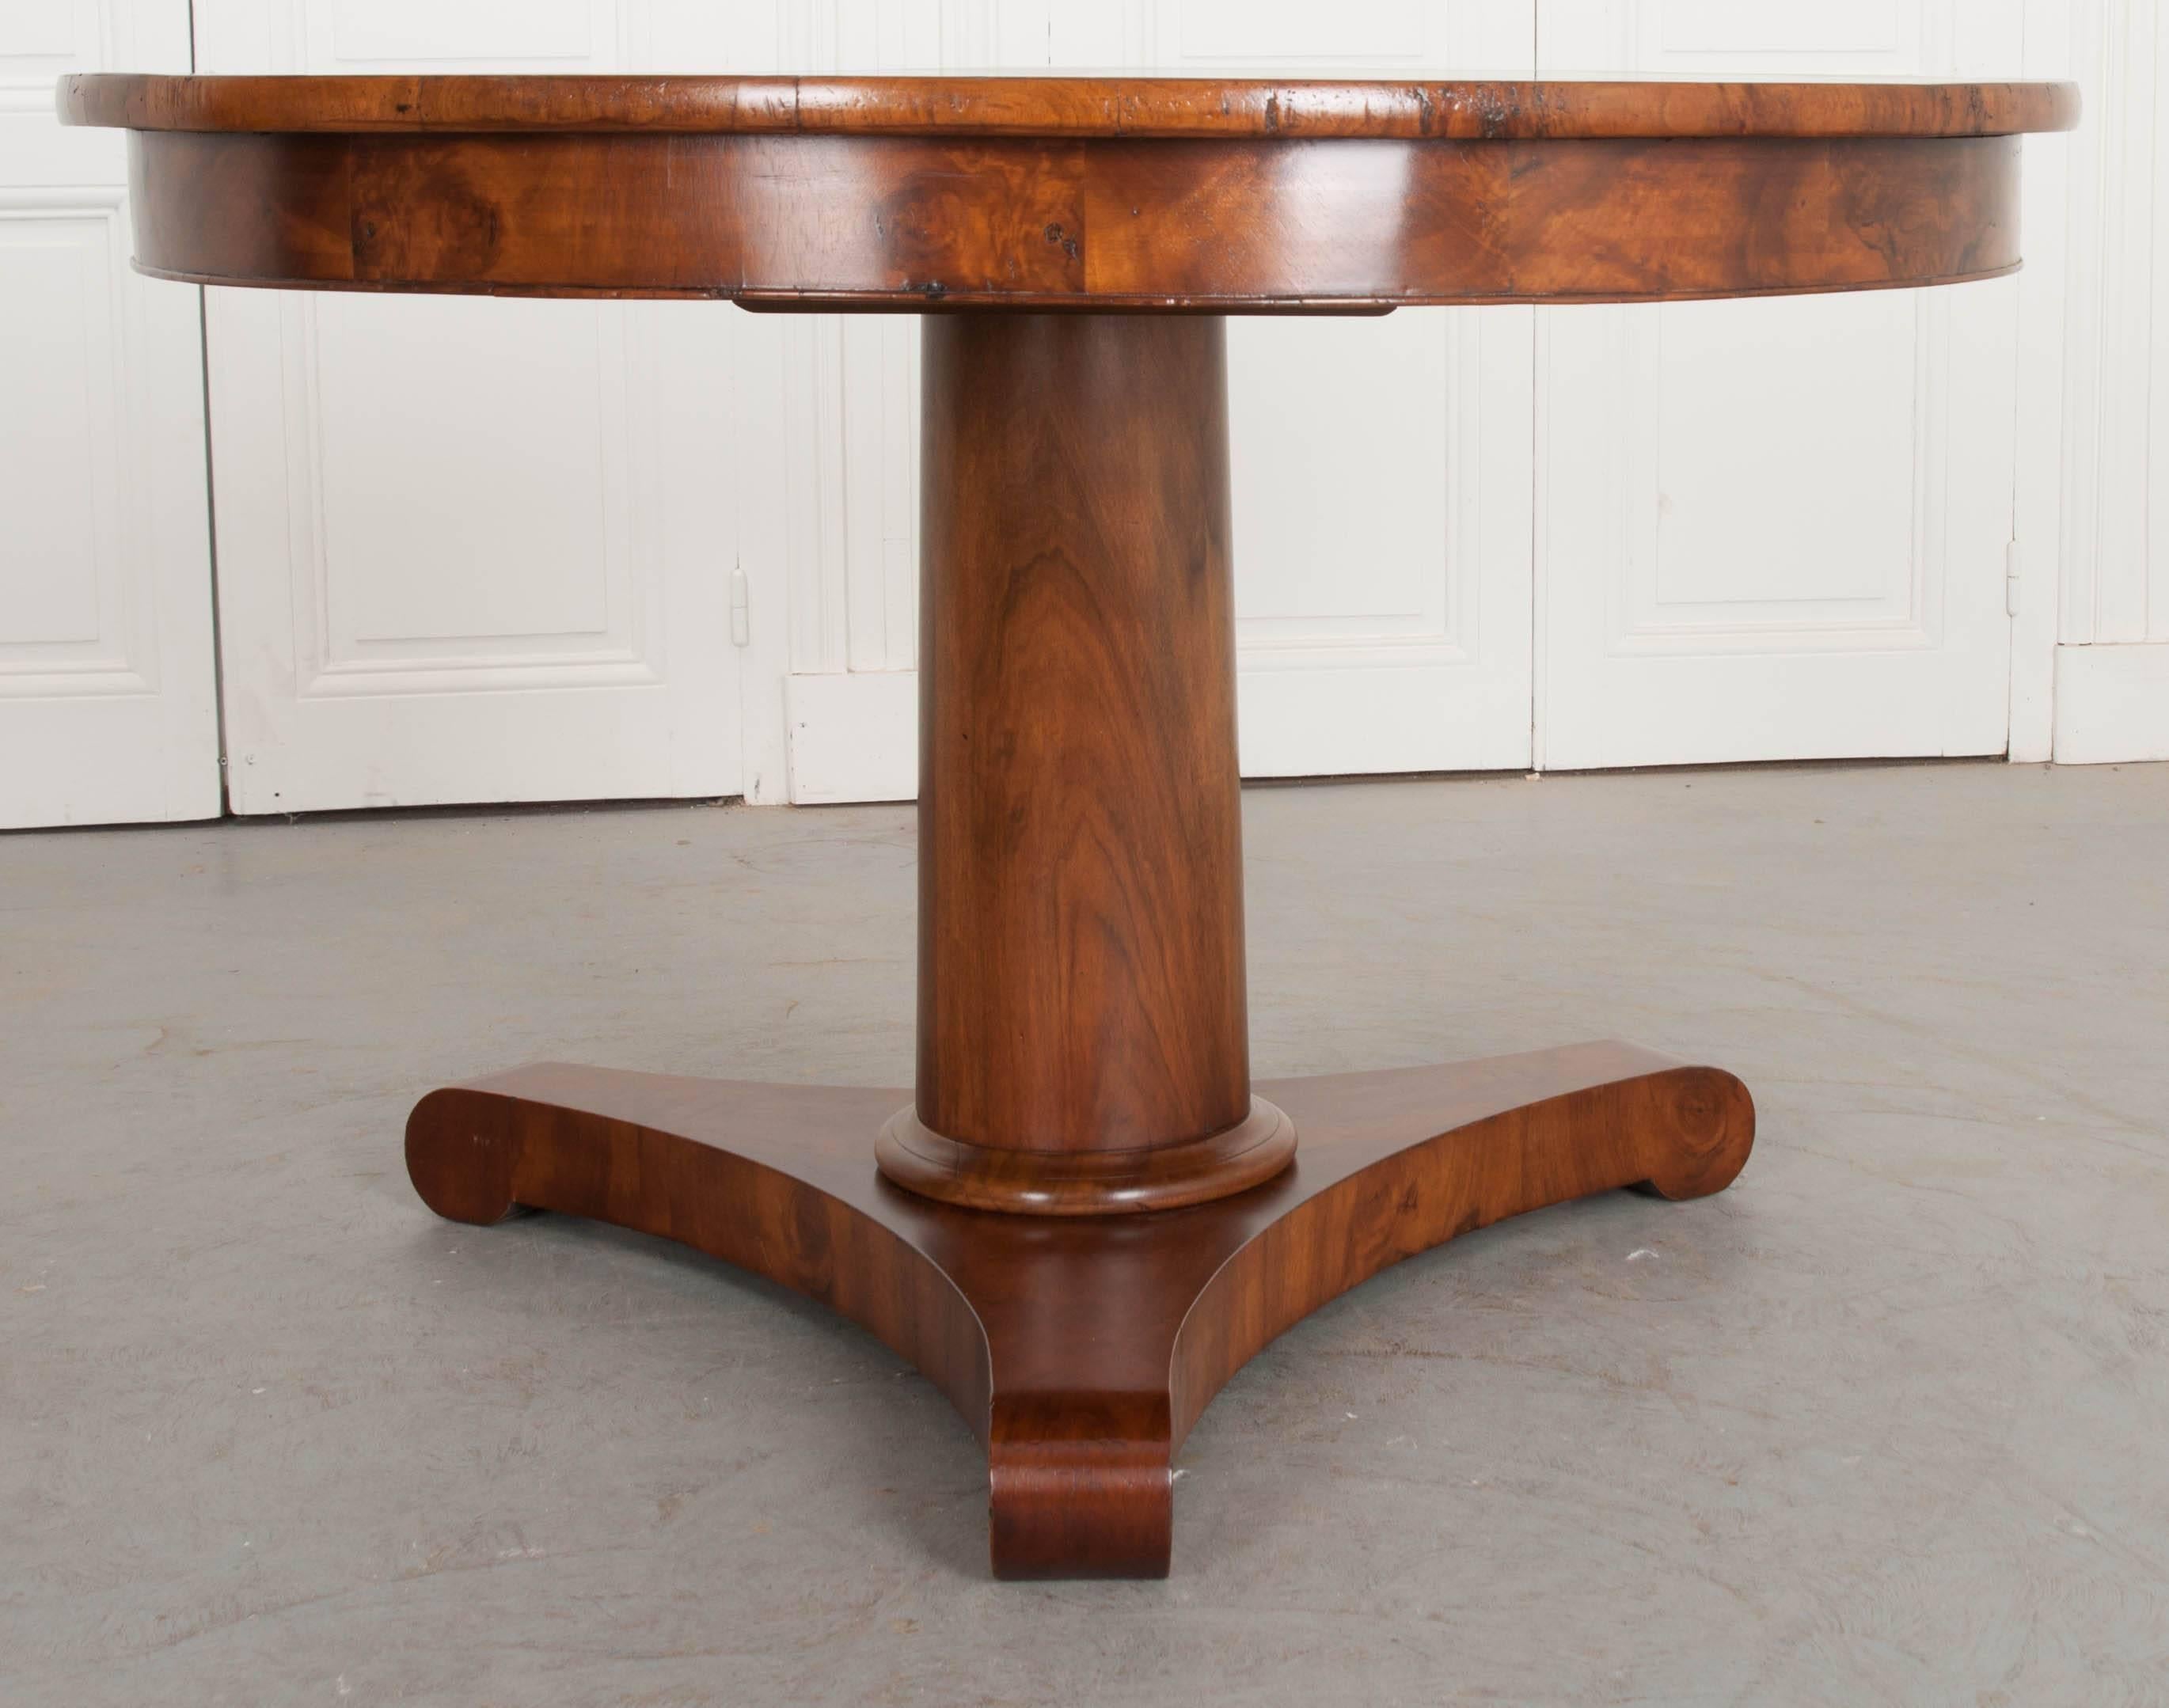 A spectacular large walnut center table, with pedestal base, from 19th century, France. An extraordinary concave tripod base supports the table’s wide vertical column shaft. Both the base and shaft have been carefully bookmatched. The table’s top is